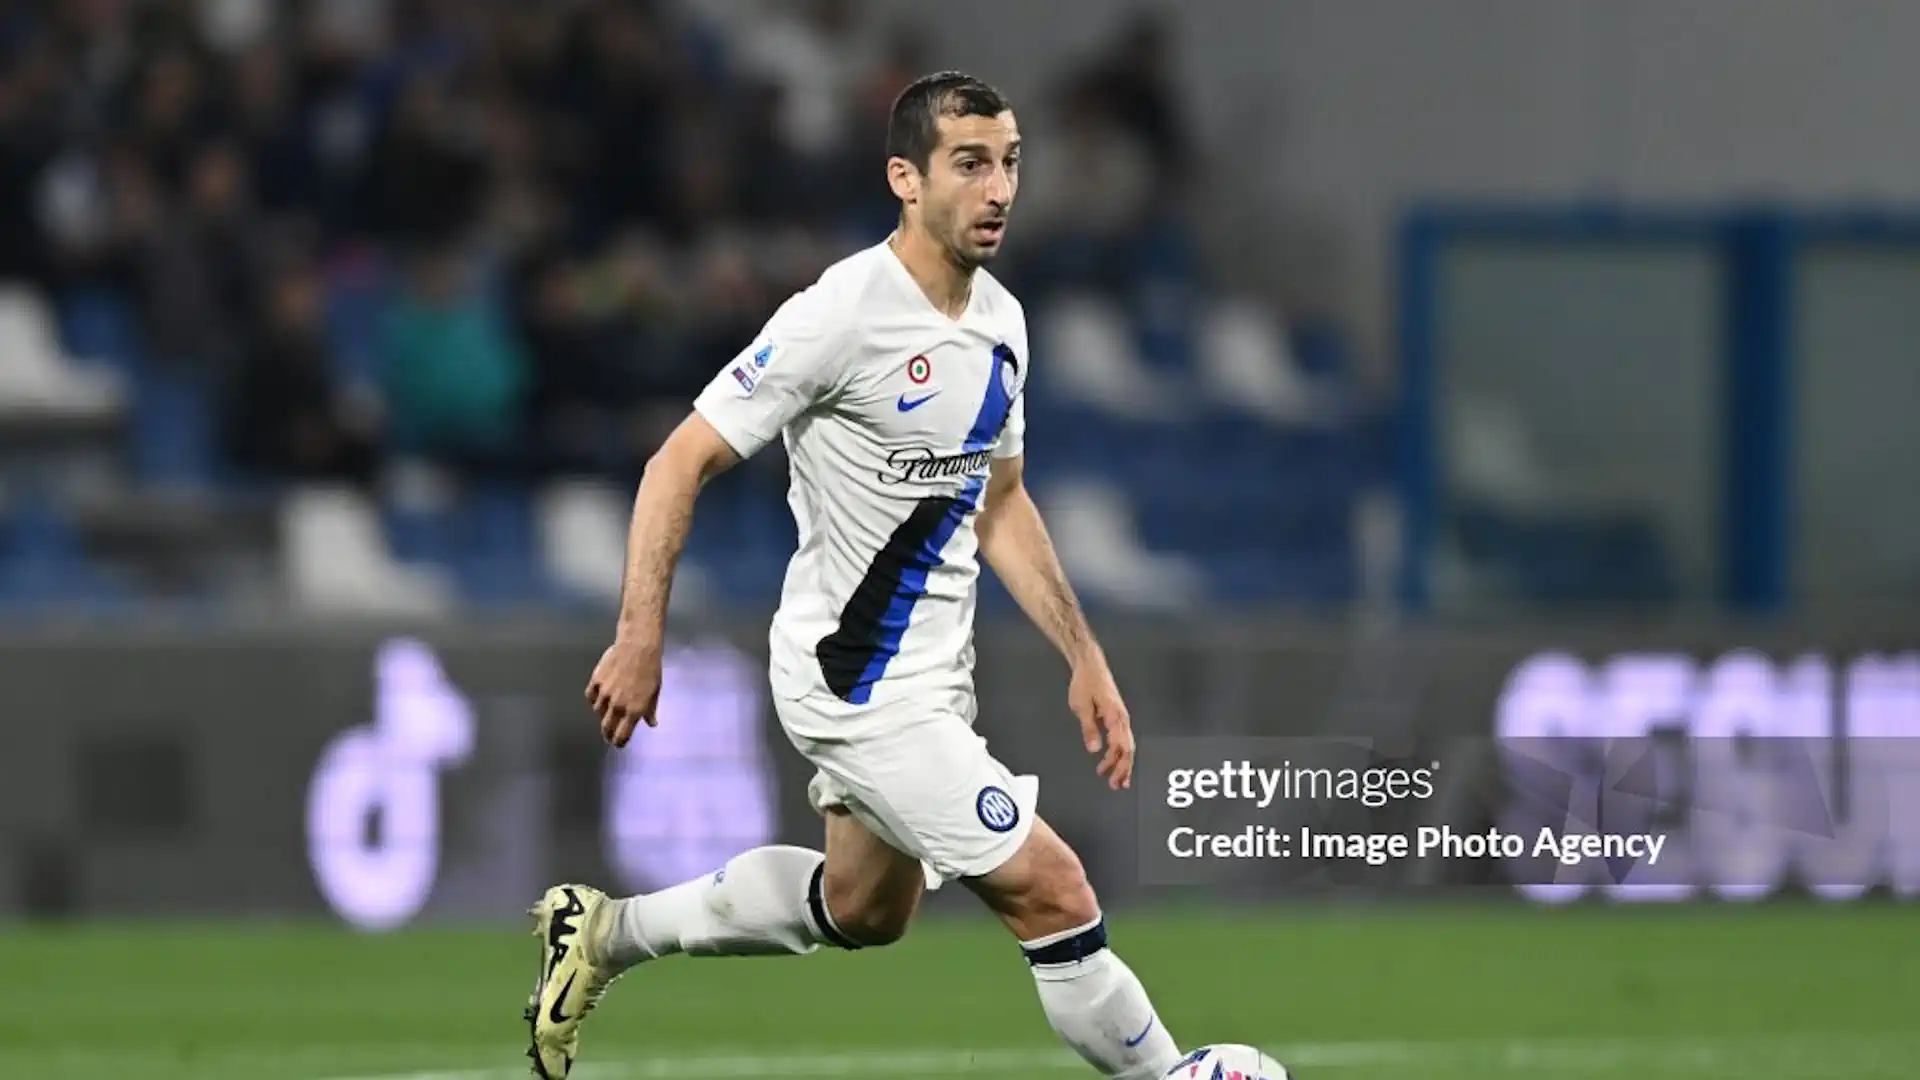 Inter suffered their second defeat of the season. Mkhitaryan played in the starting line-up